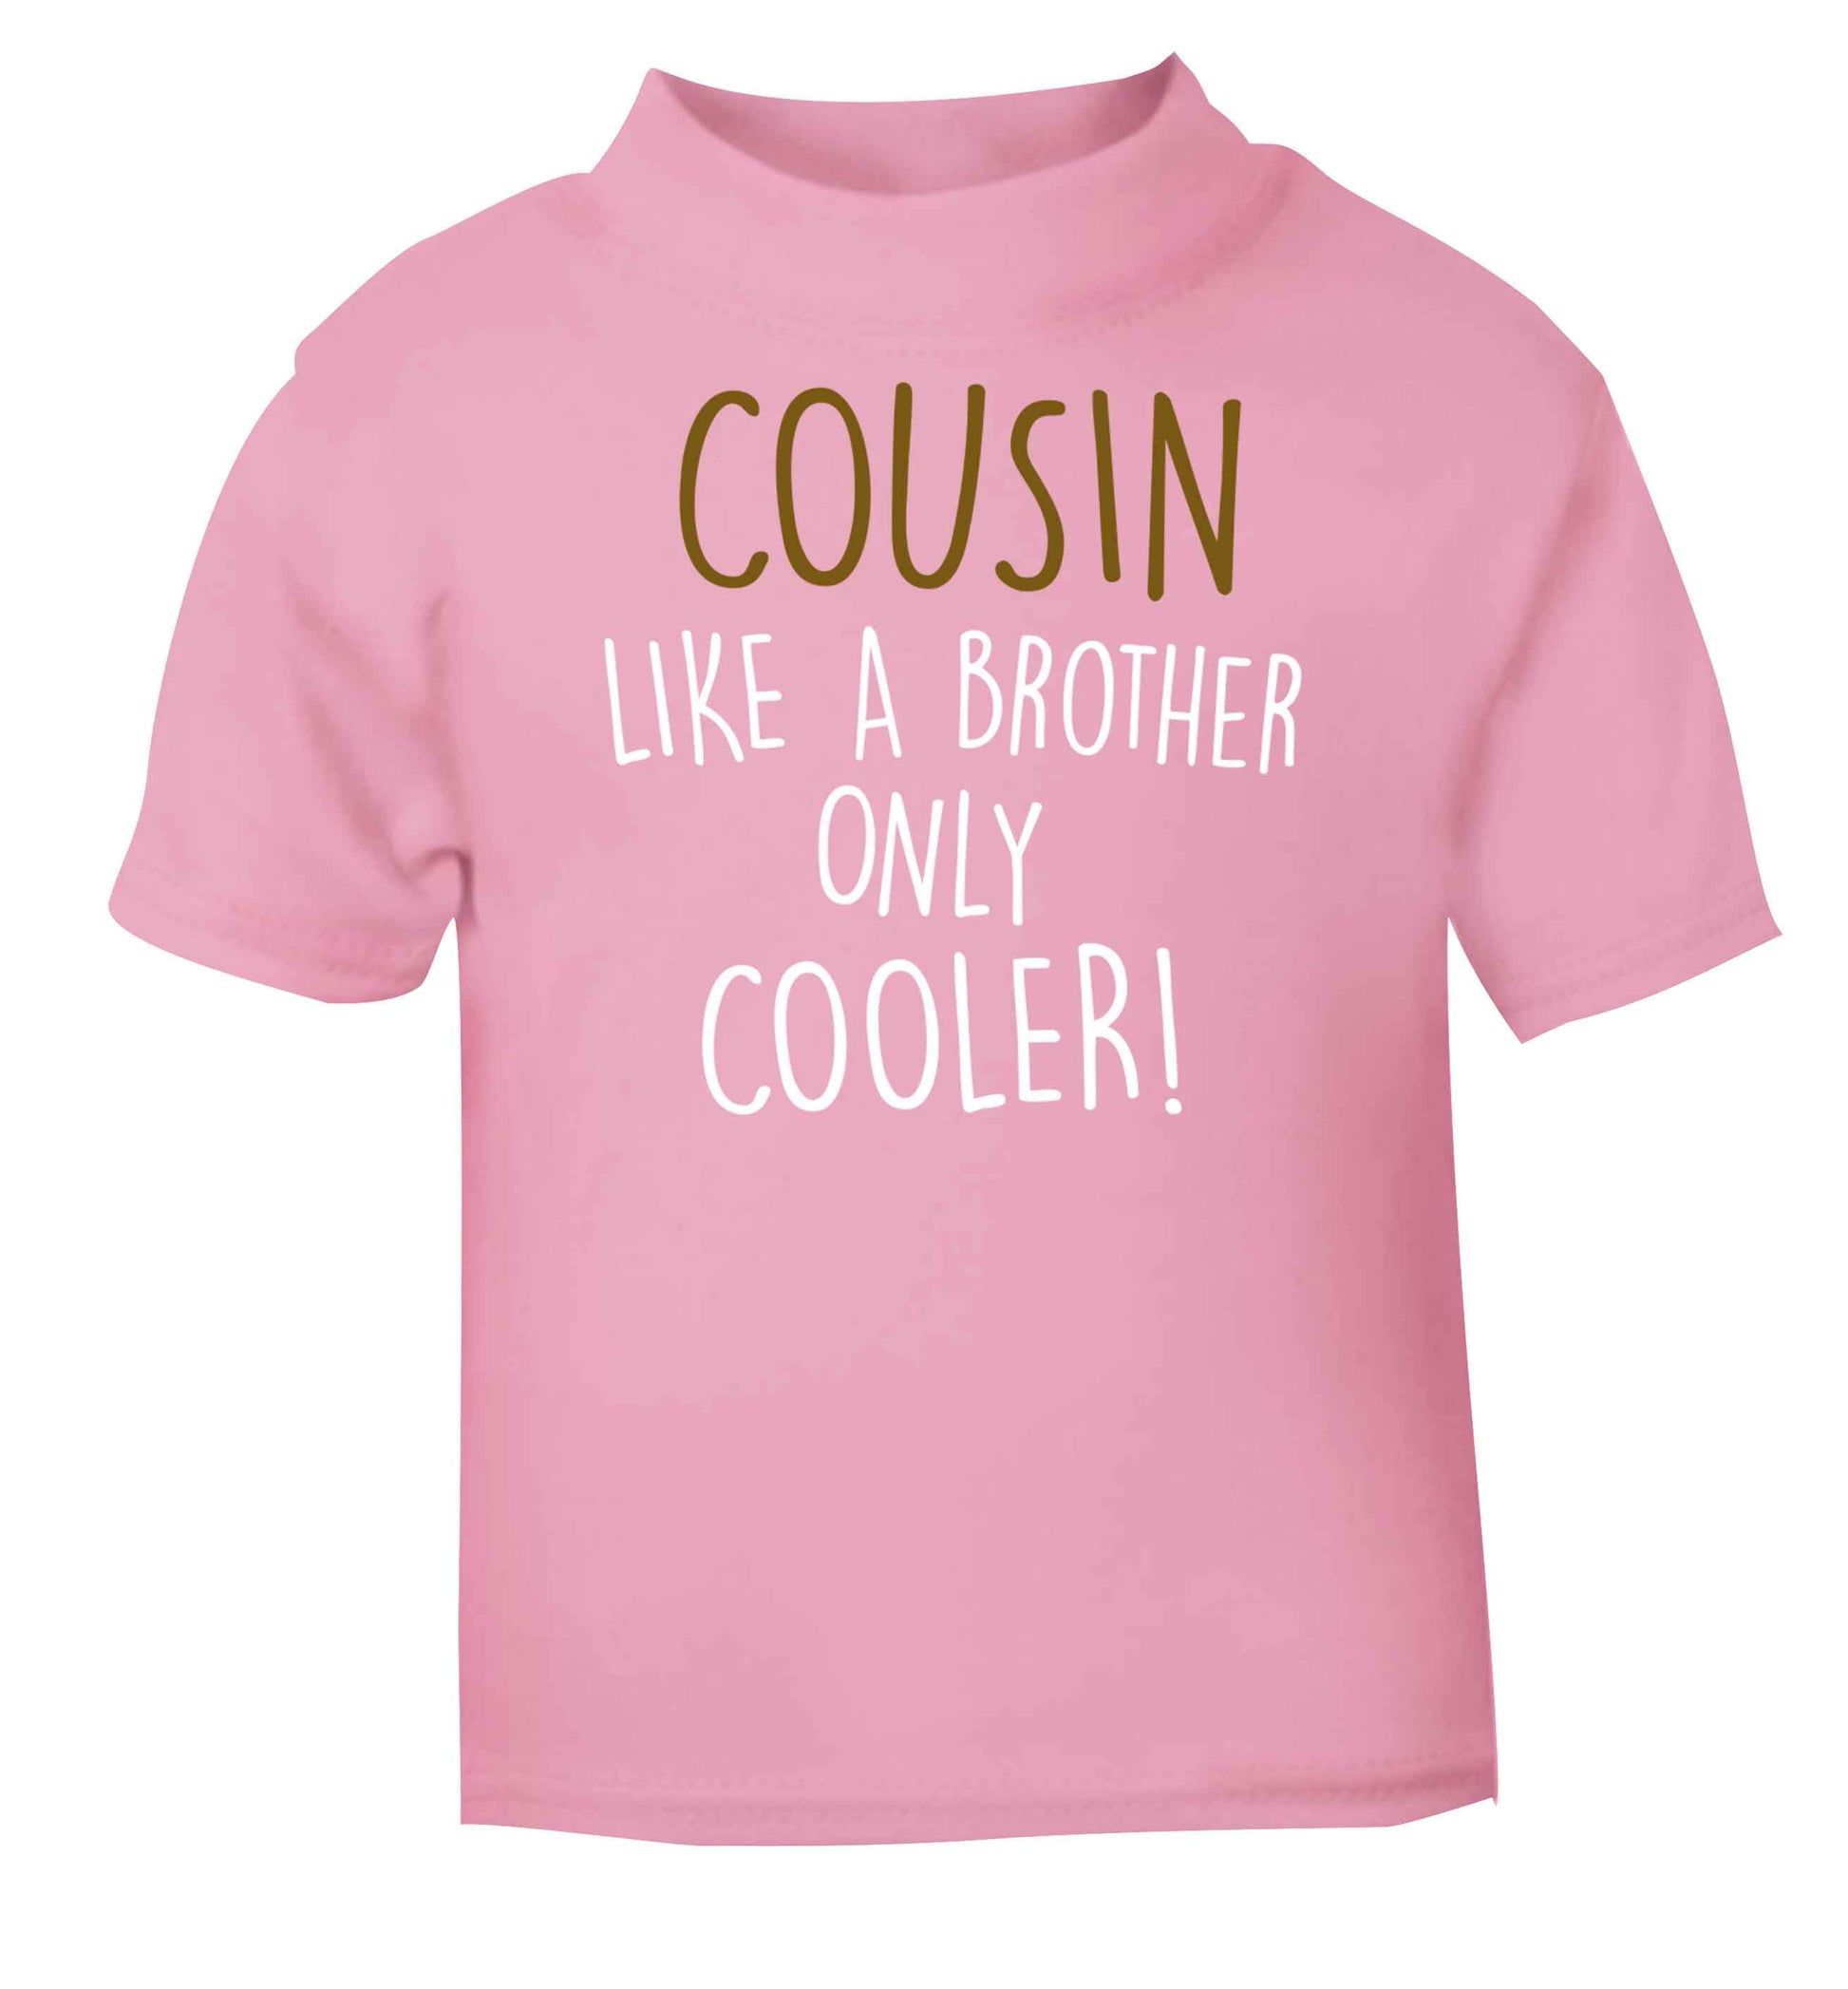 Cousin like a brother only cooler light pink baby toddler Tshirt 2 Years